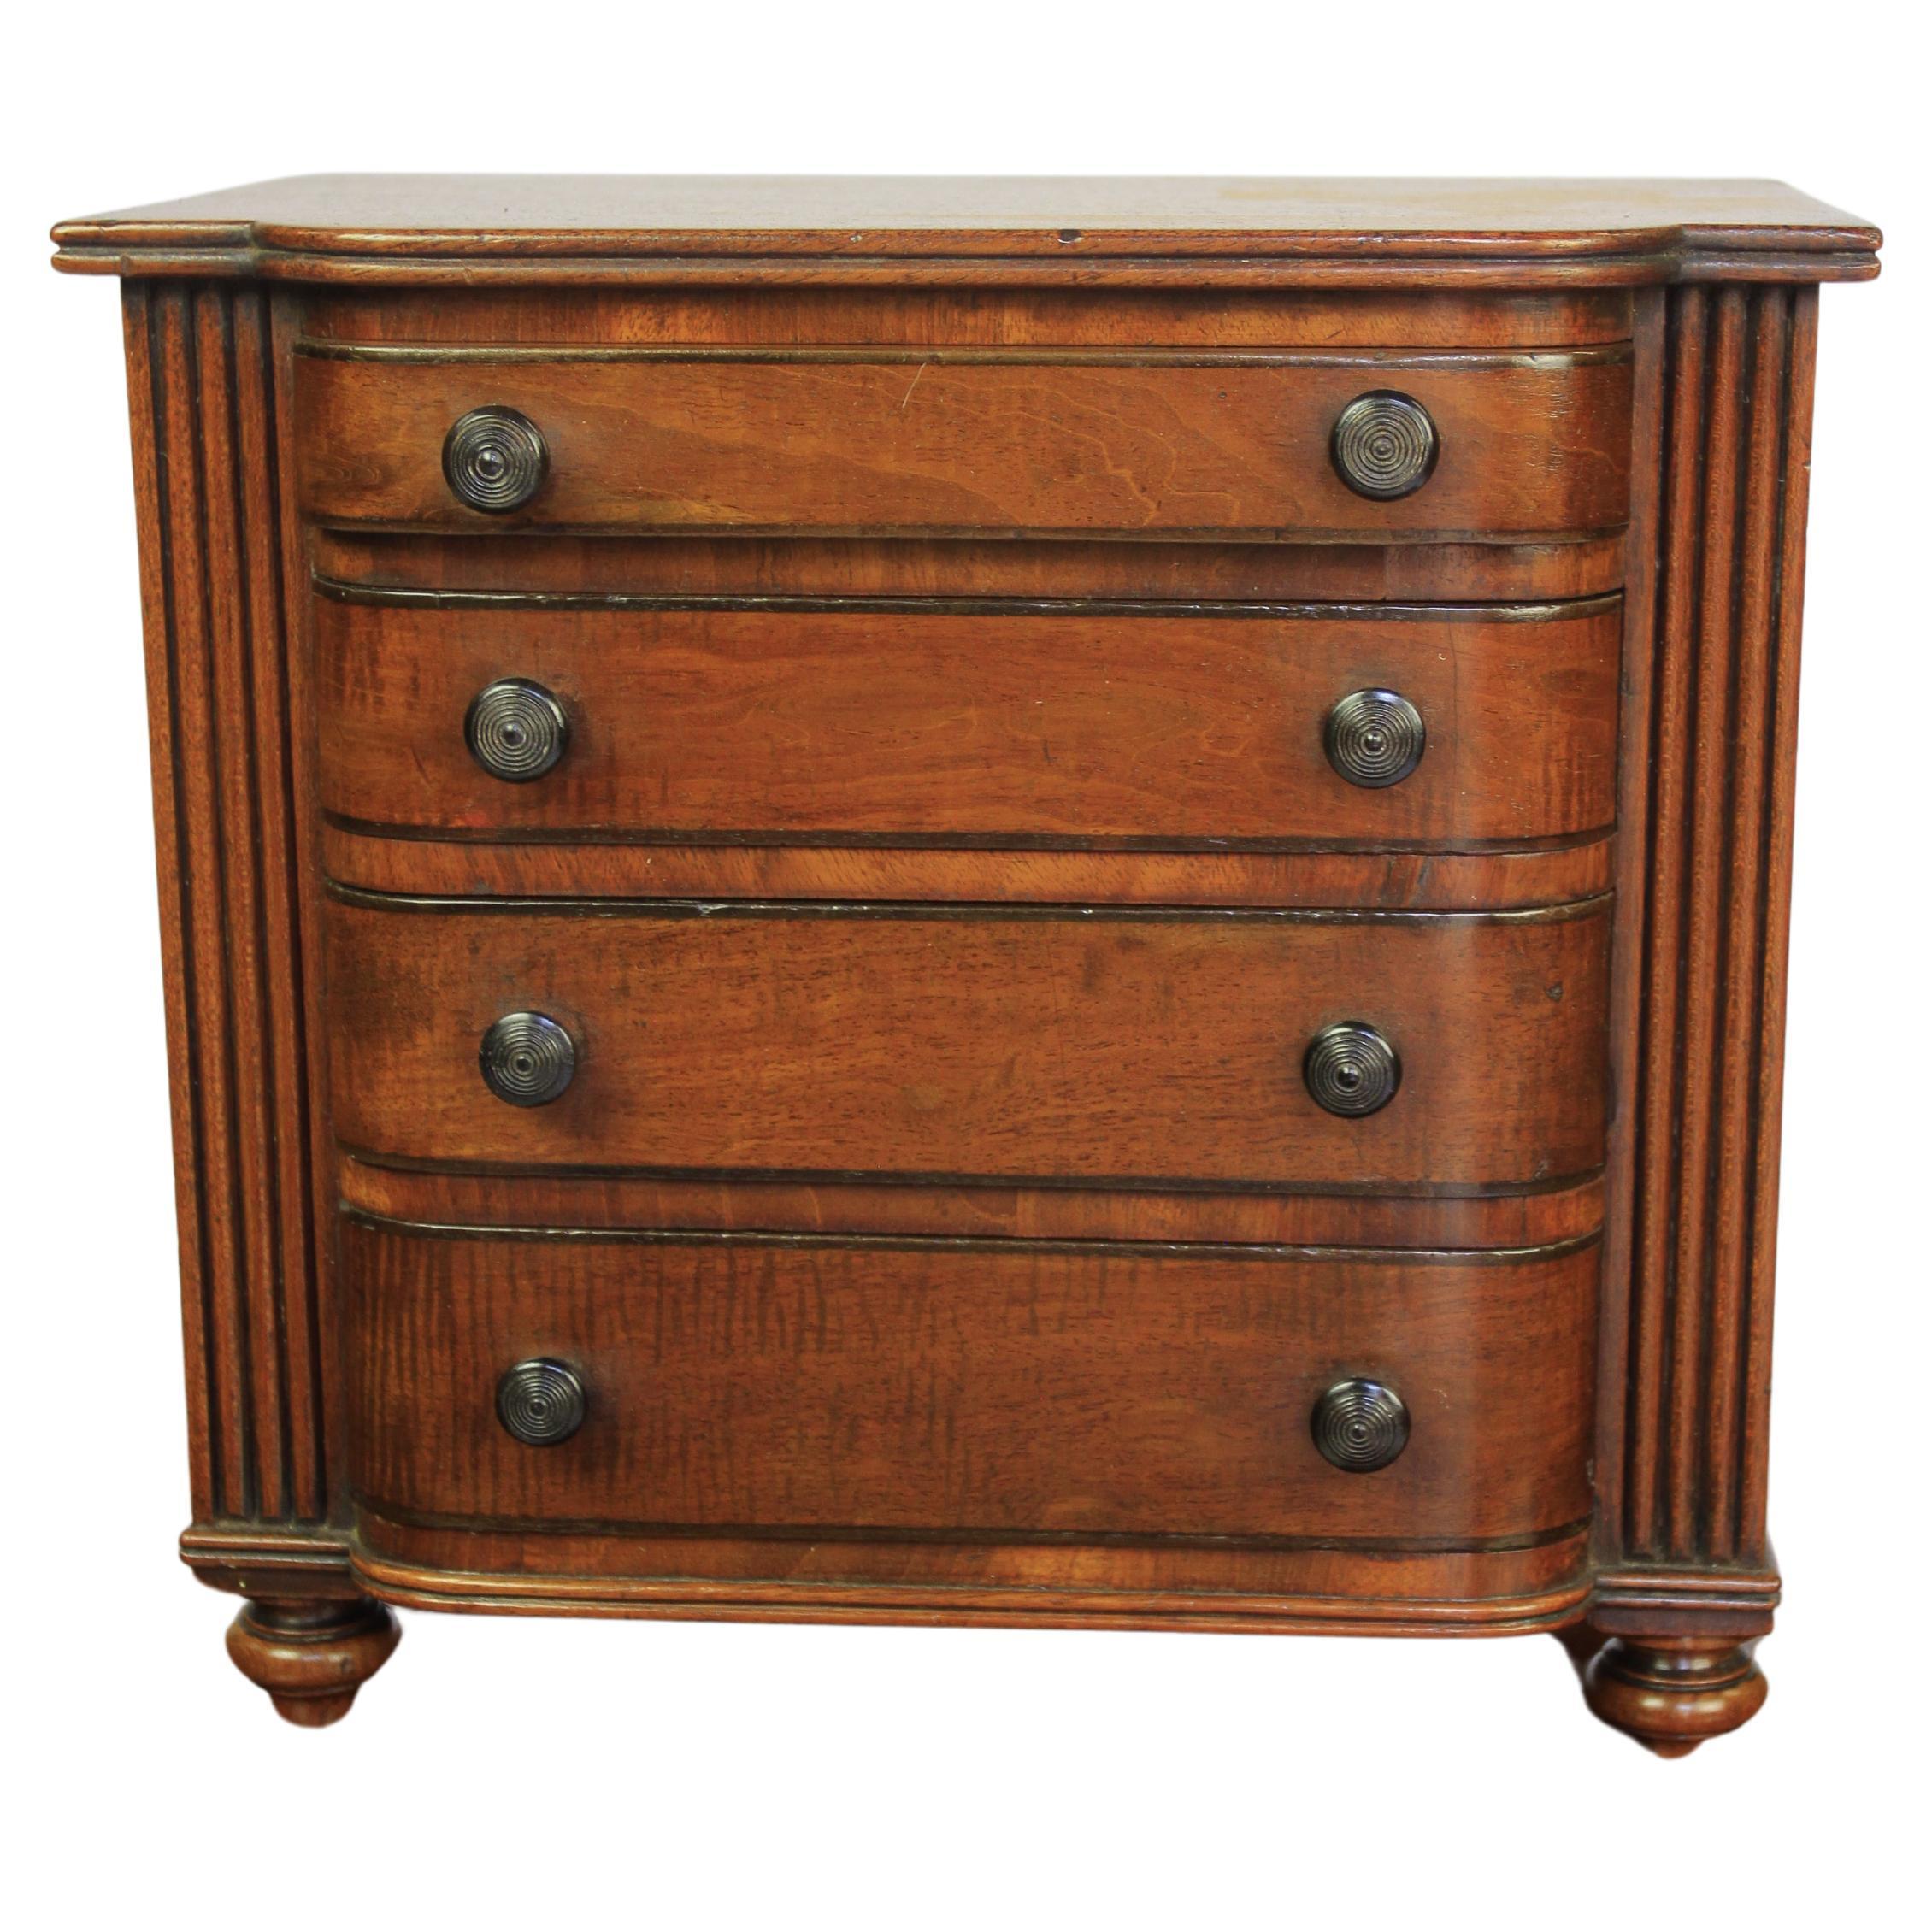 Regency Miniature 4 drawer Mahogany D front chest